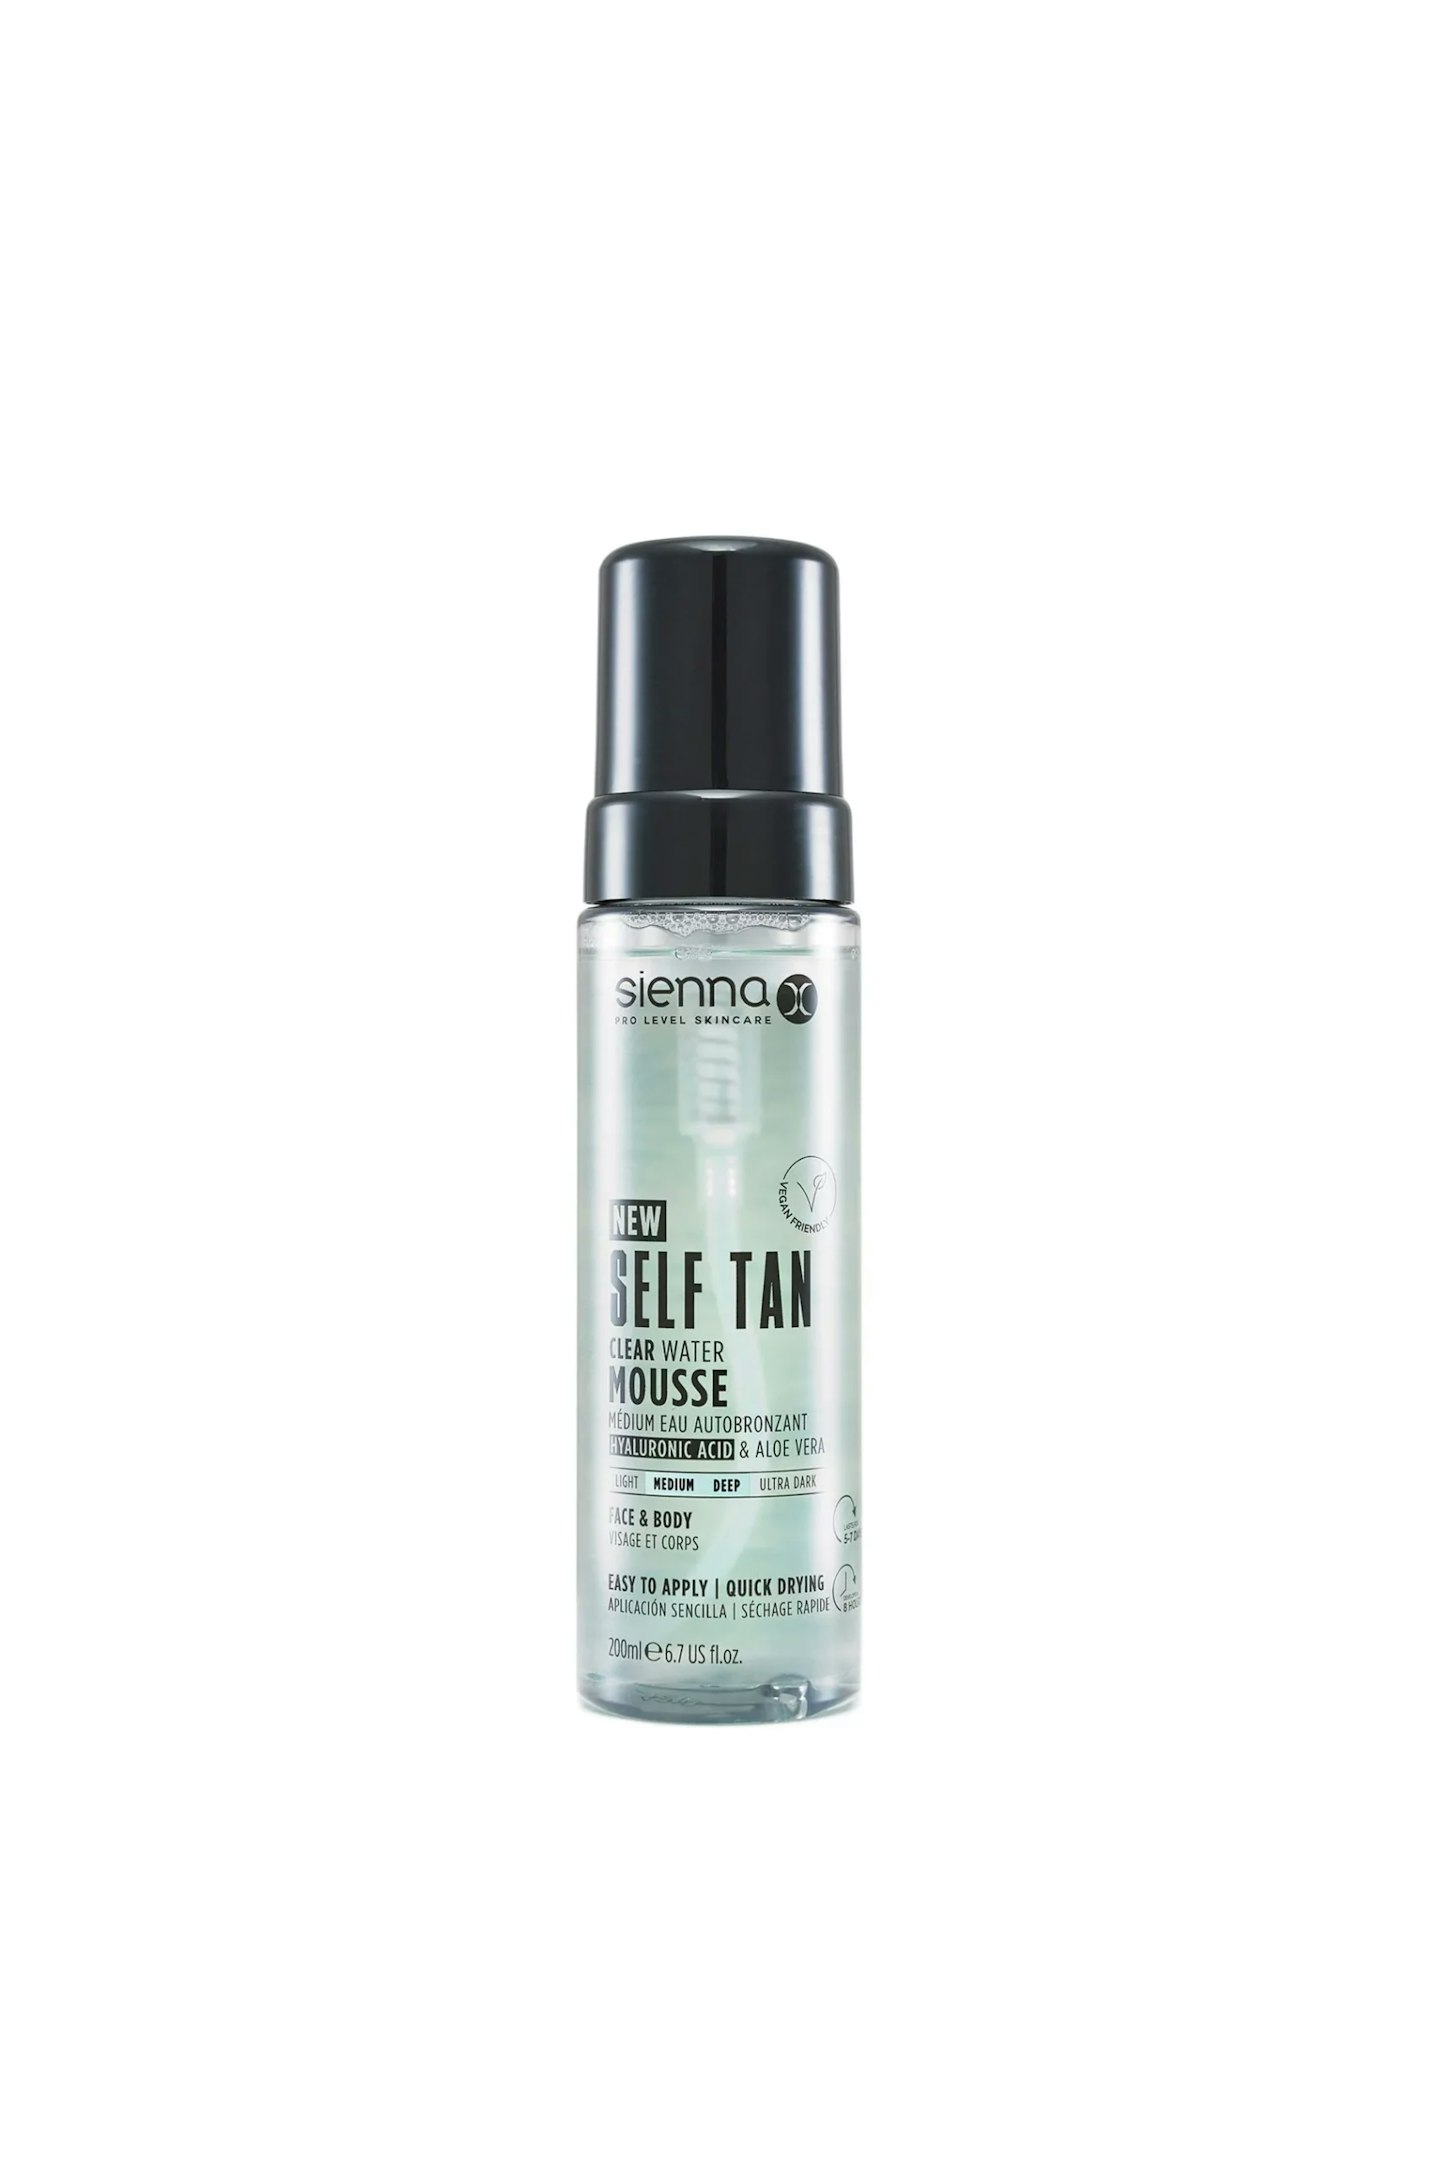 Sienna X Self Tan Clear Water Mousse